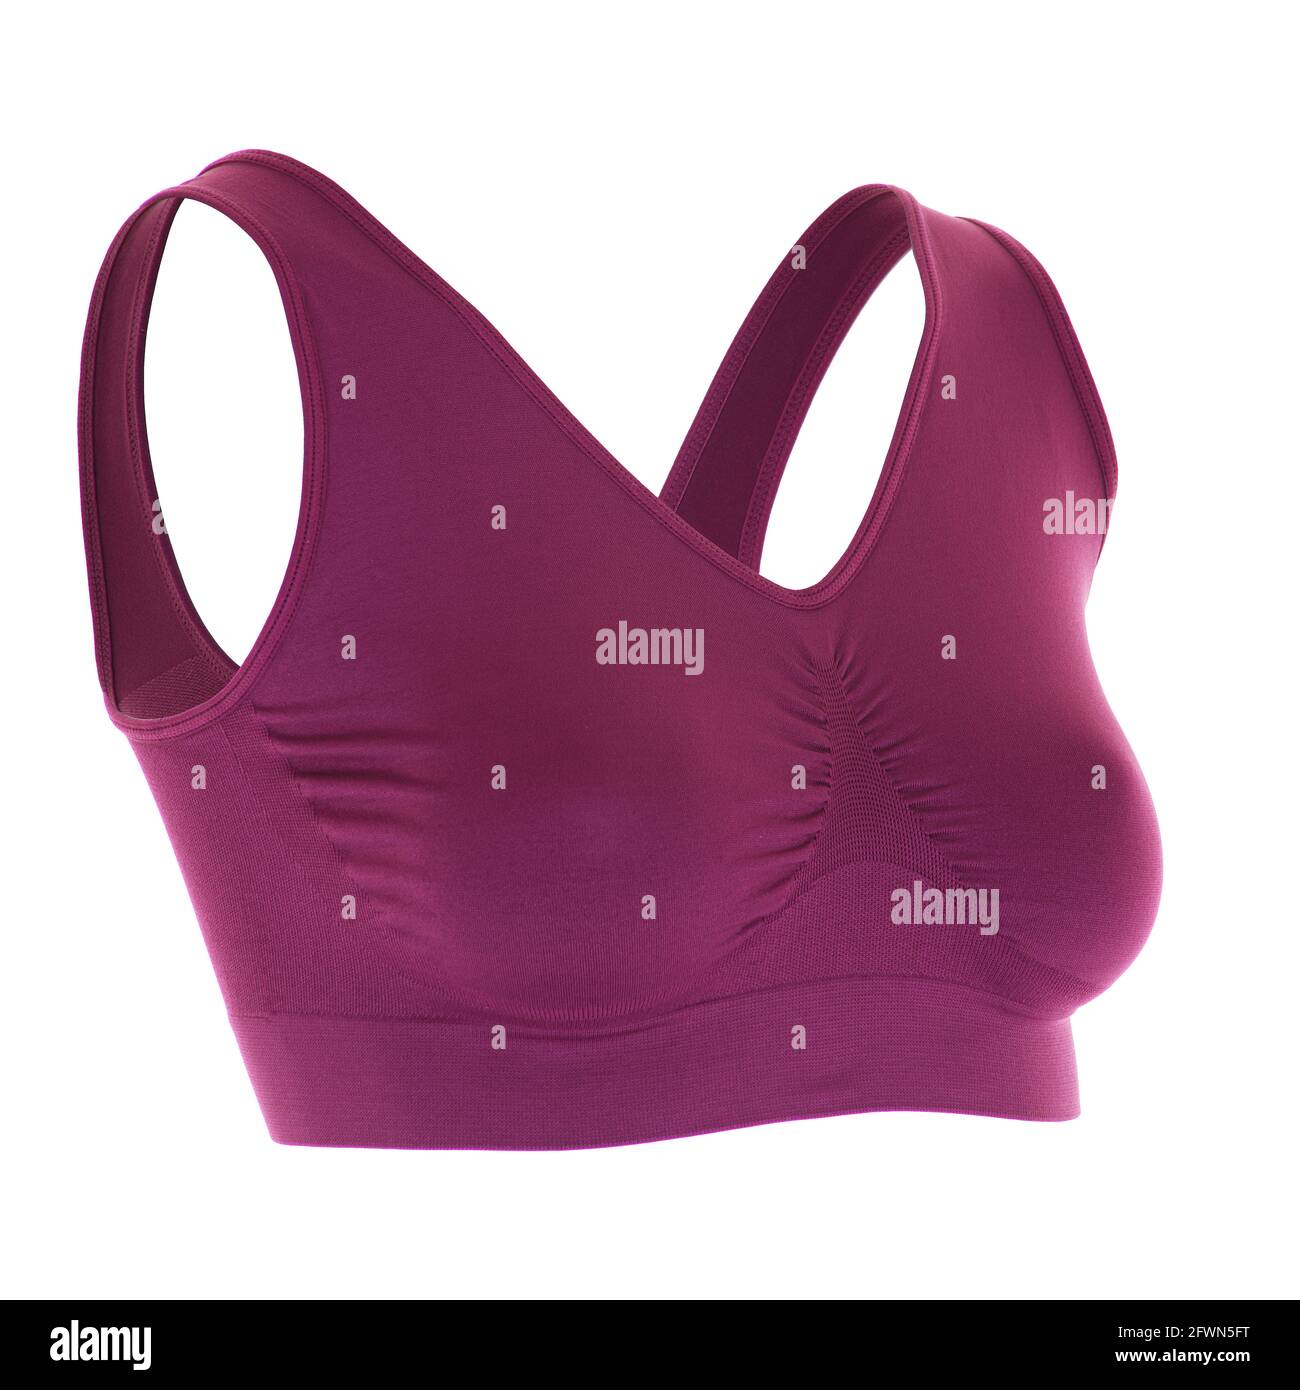 https://c8.alamy.com/comp/2FWN5FT/womens-sports-bra-red-invisible-ghost-mannequin-with-clipping-path-2FWN5FT.jpg